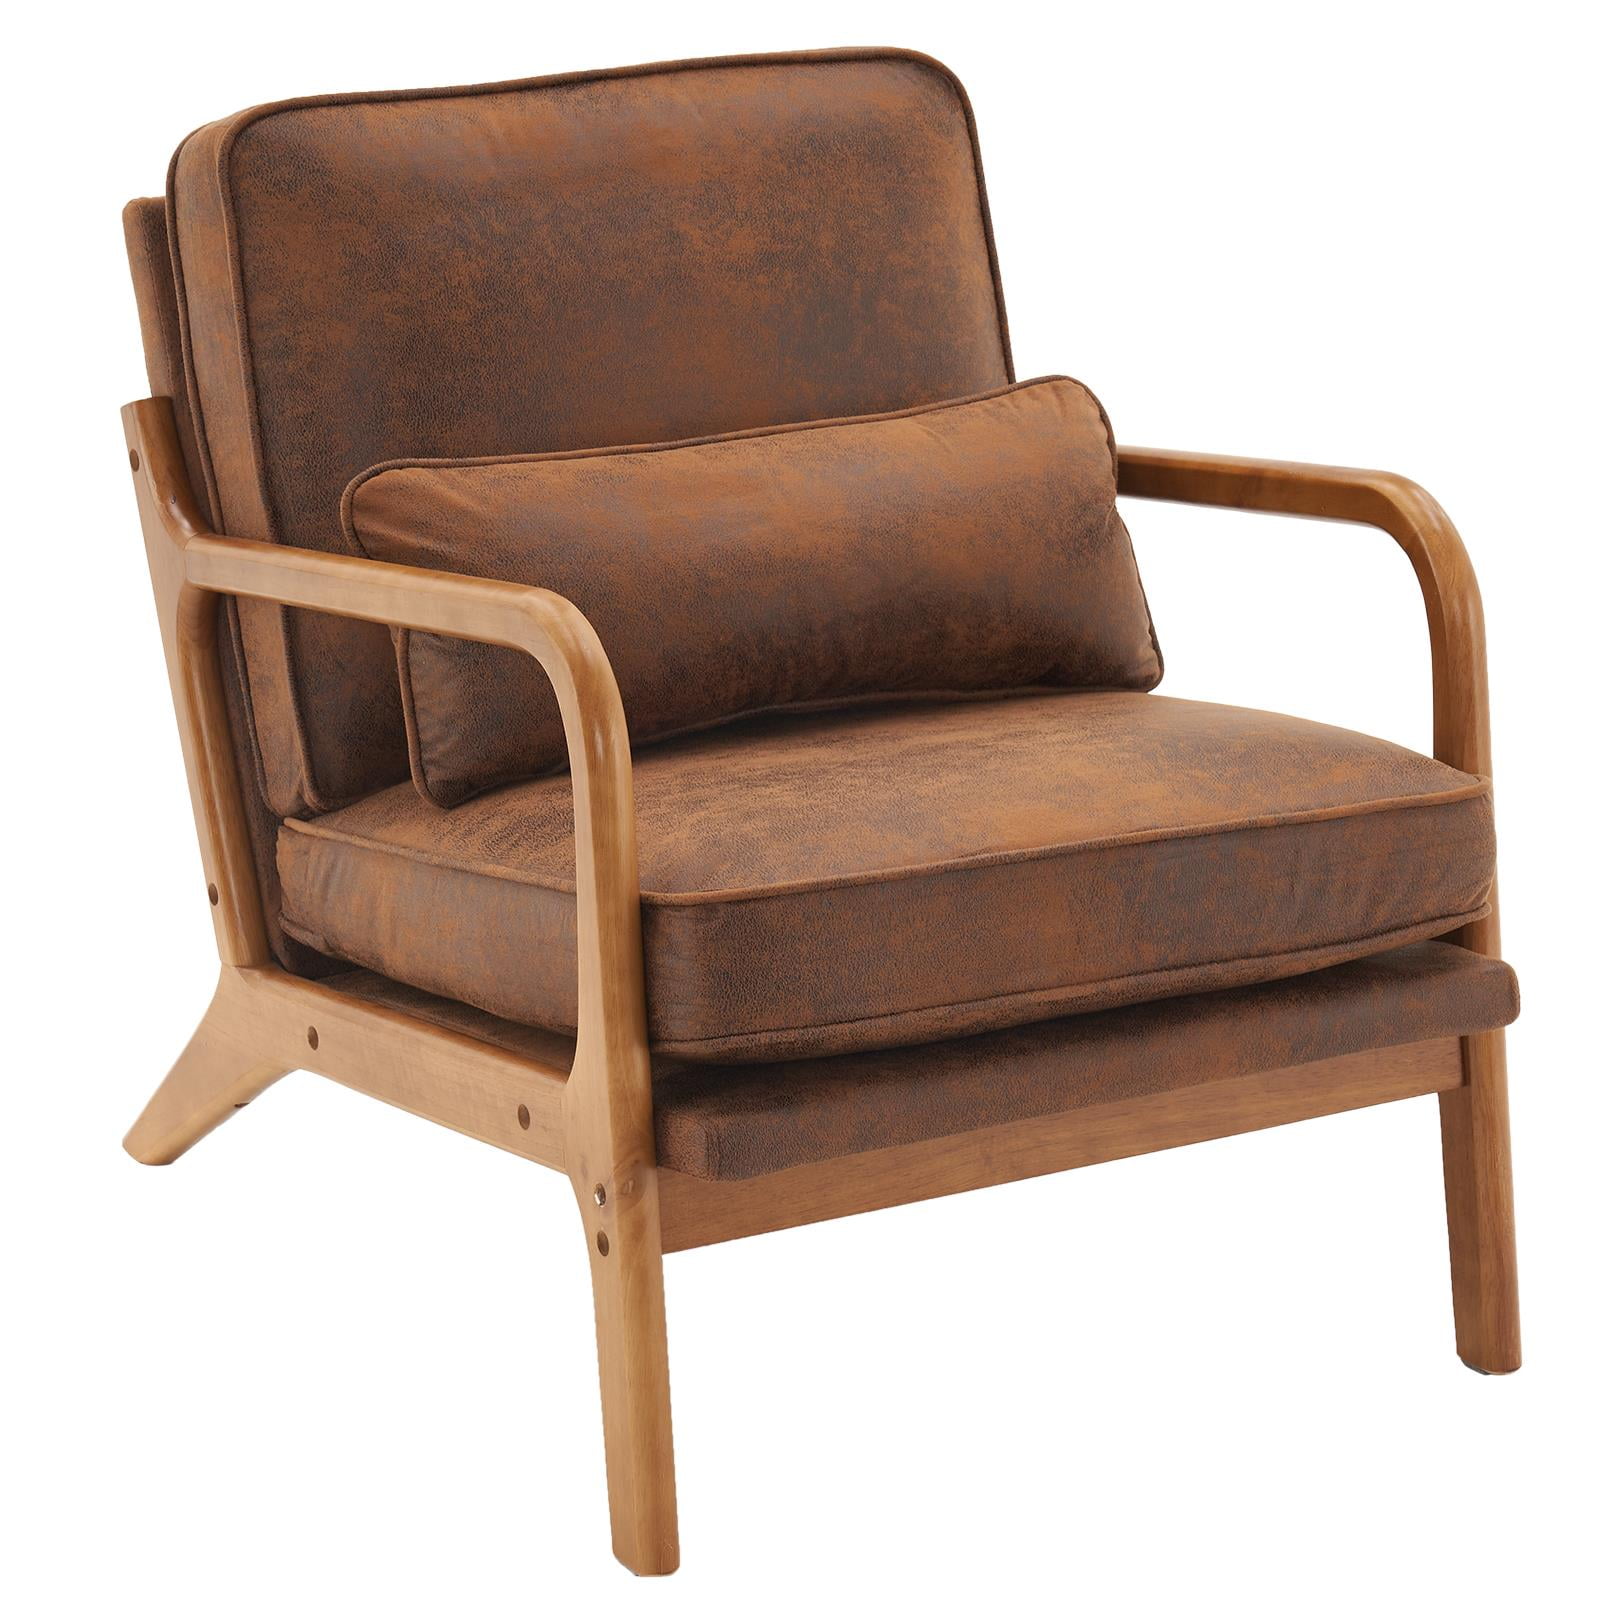 Frame Modern Chair Club Reading Bronzing Accent Cloth UBesGoo Upholstered Wood Chair Solid with Fabric Wood Brown